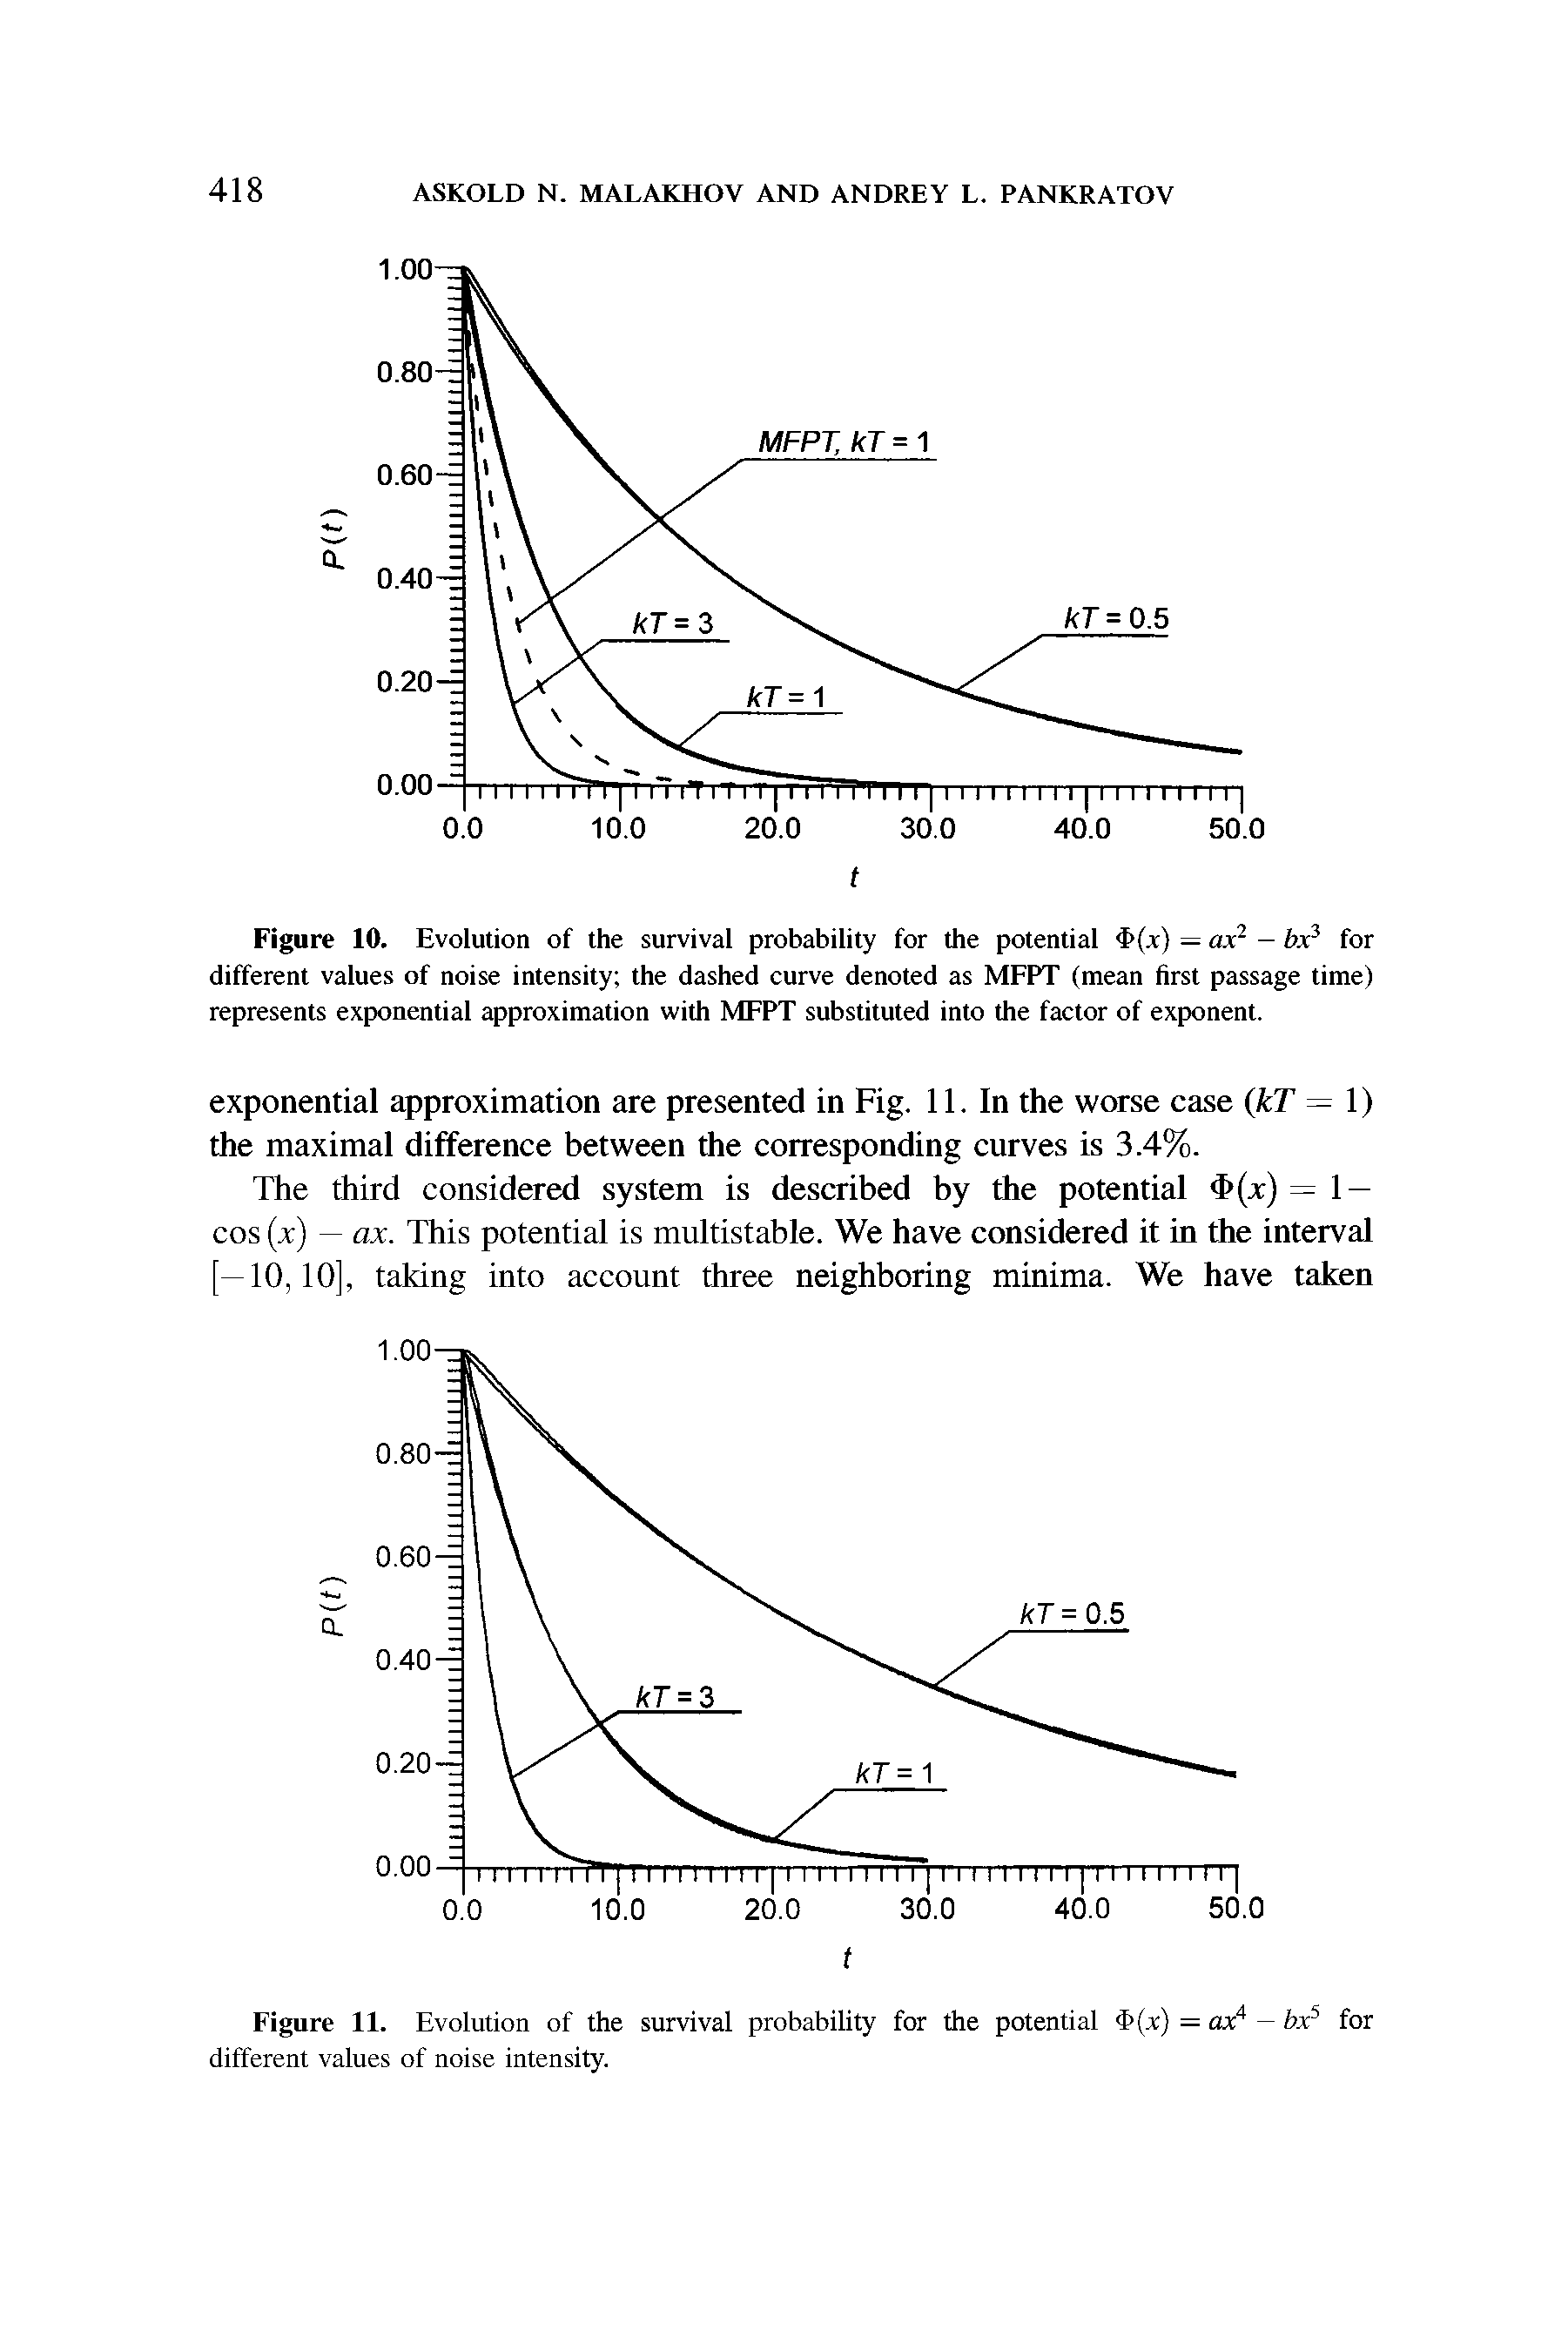 Figure 11. Evolution of the survival probability for the potential <b(x) = ax4 — bx5 for different values of noise intensity.